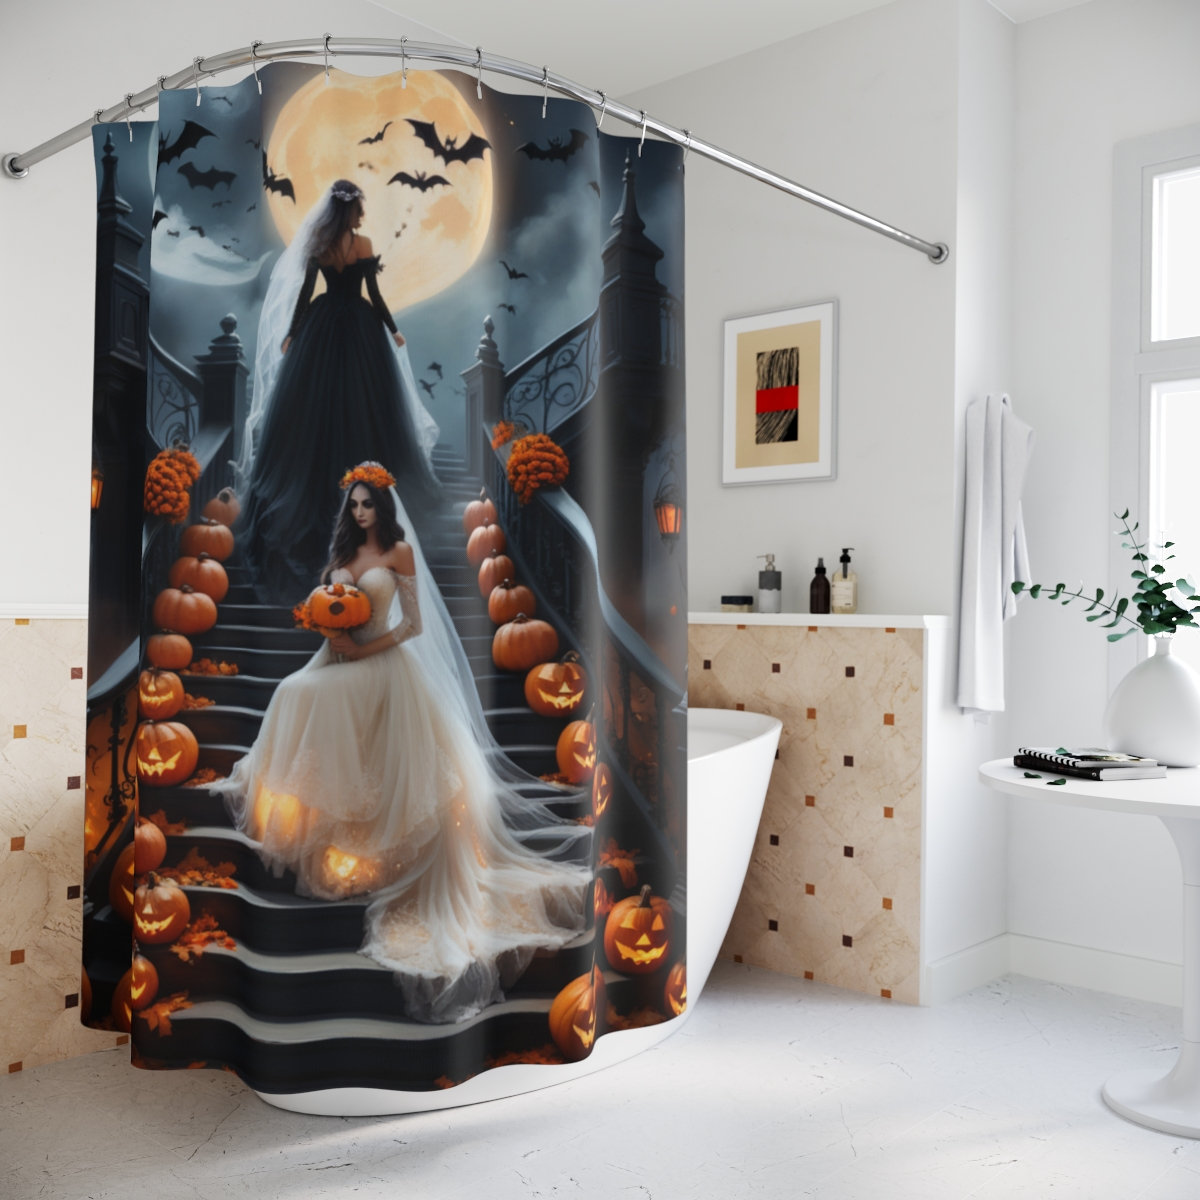  Tab Top Window Curtain,Happy Halloween Spiders- Web Black Tier  Curtains Panels Kitchen Valance 2 Drapes,Black White Pumpkin Ghost Face  Light Filtering Window Treatment for Bathroom Bedroom Cafe : Home & Kitchen